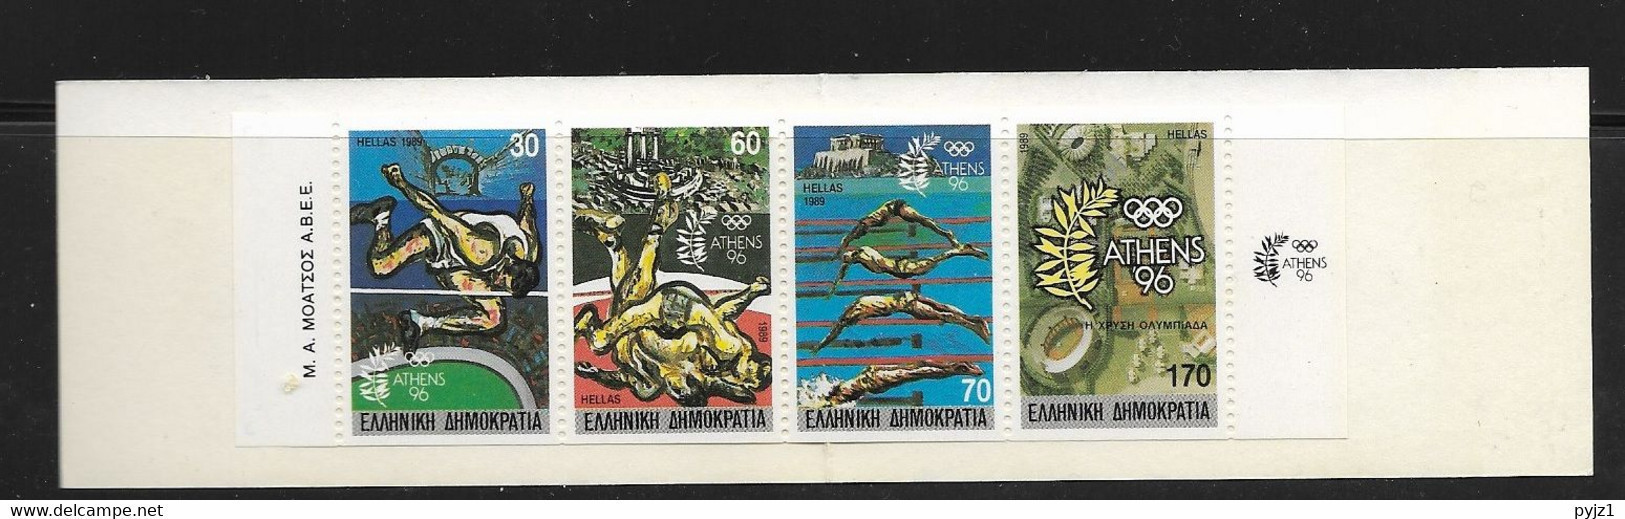 1989 MNH  Greece, Booklet Olympic Games  MH11 - Carnets